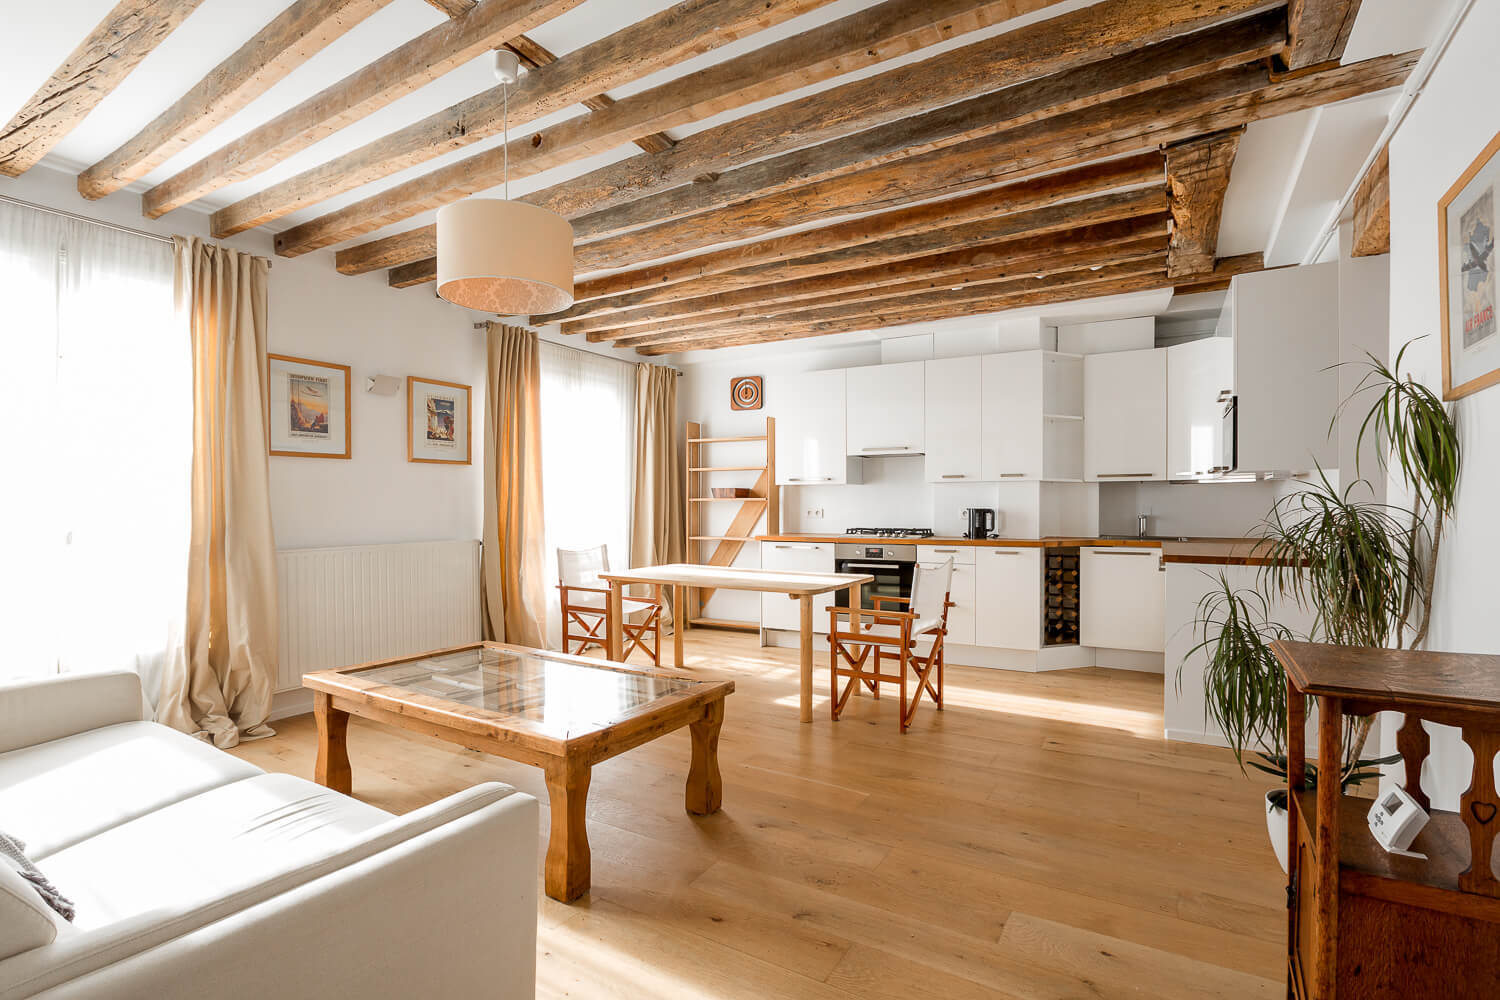 Historical apartment in Le Marais with wooden beams on the ceilings